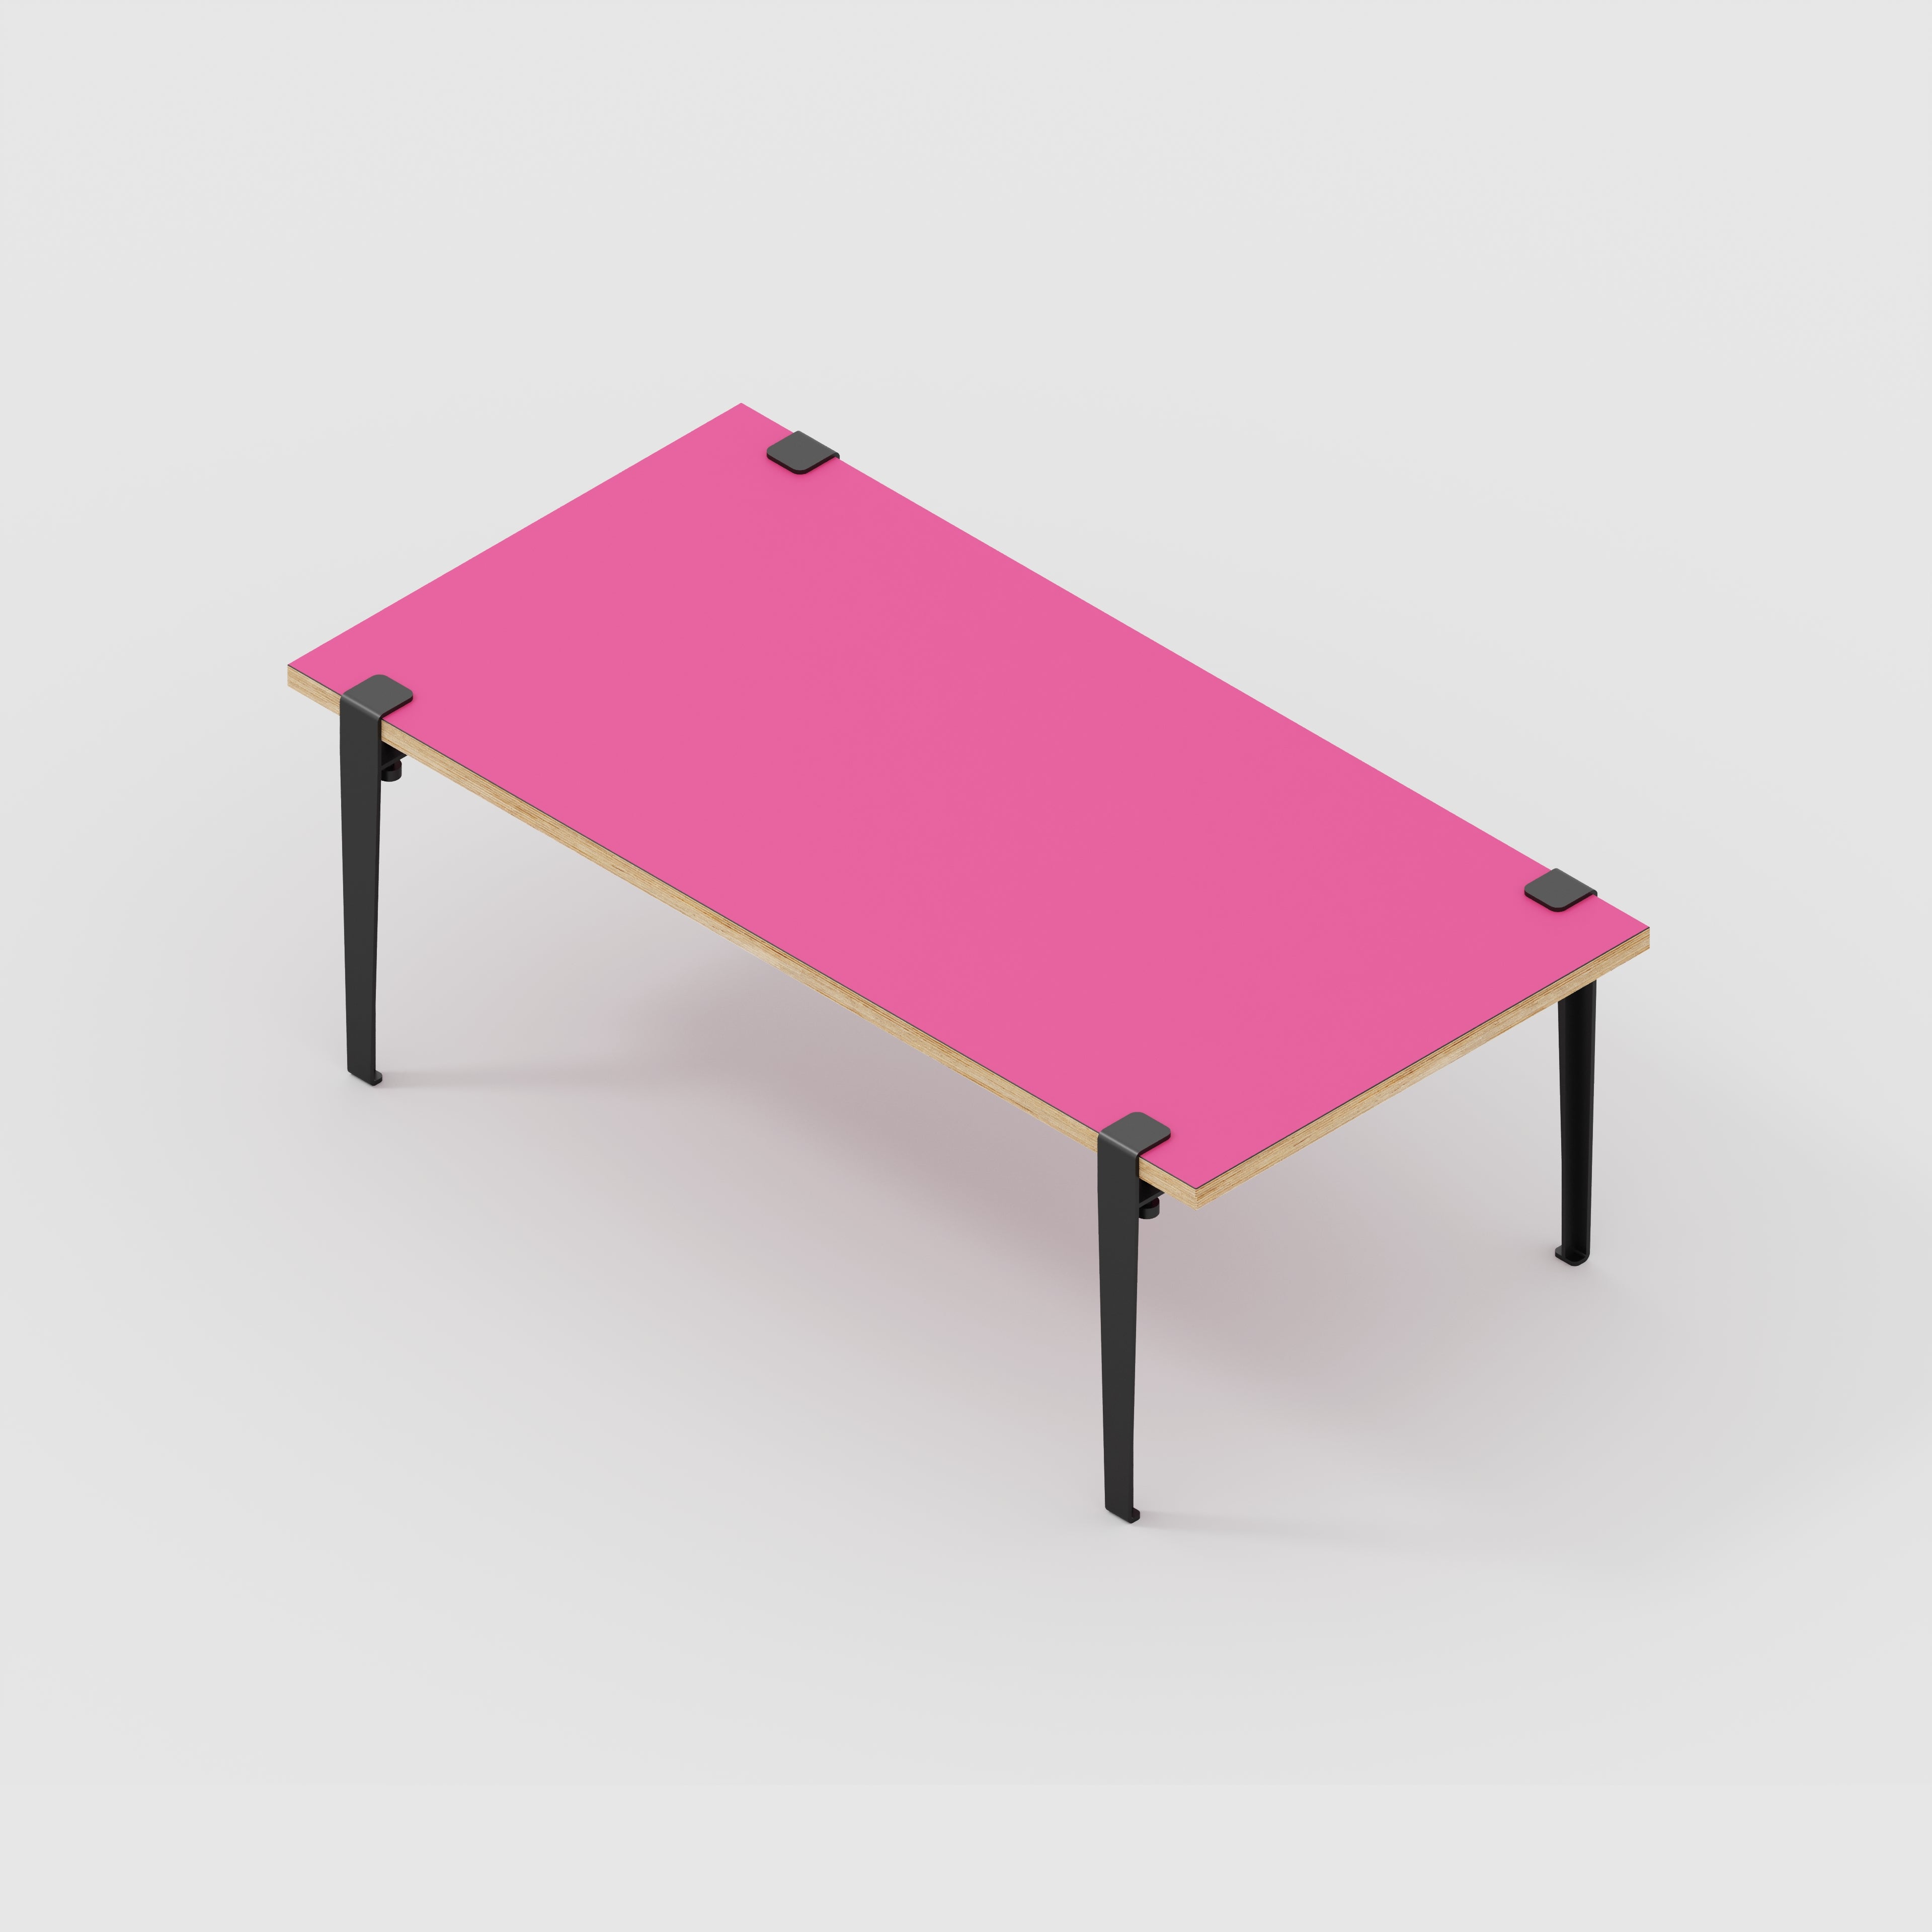 Coffee Table with Black Tiptoe Legs - Formica Juicy Pink - 1200(w) x 600(d) x 430(h)